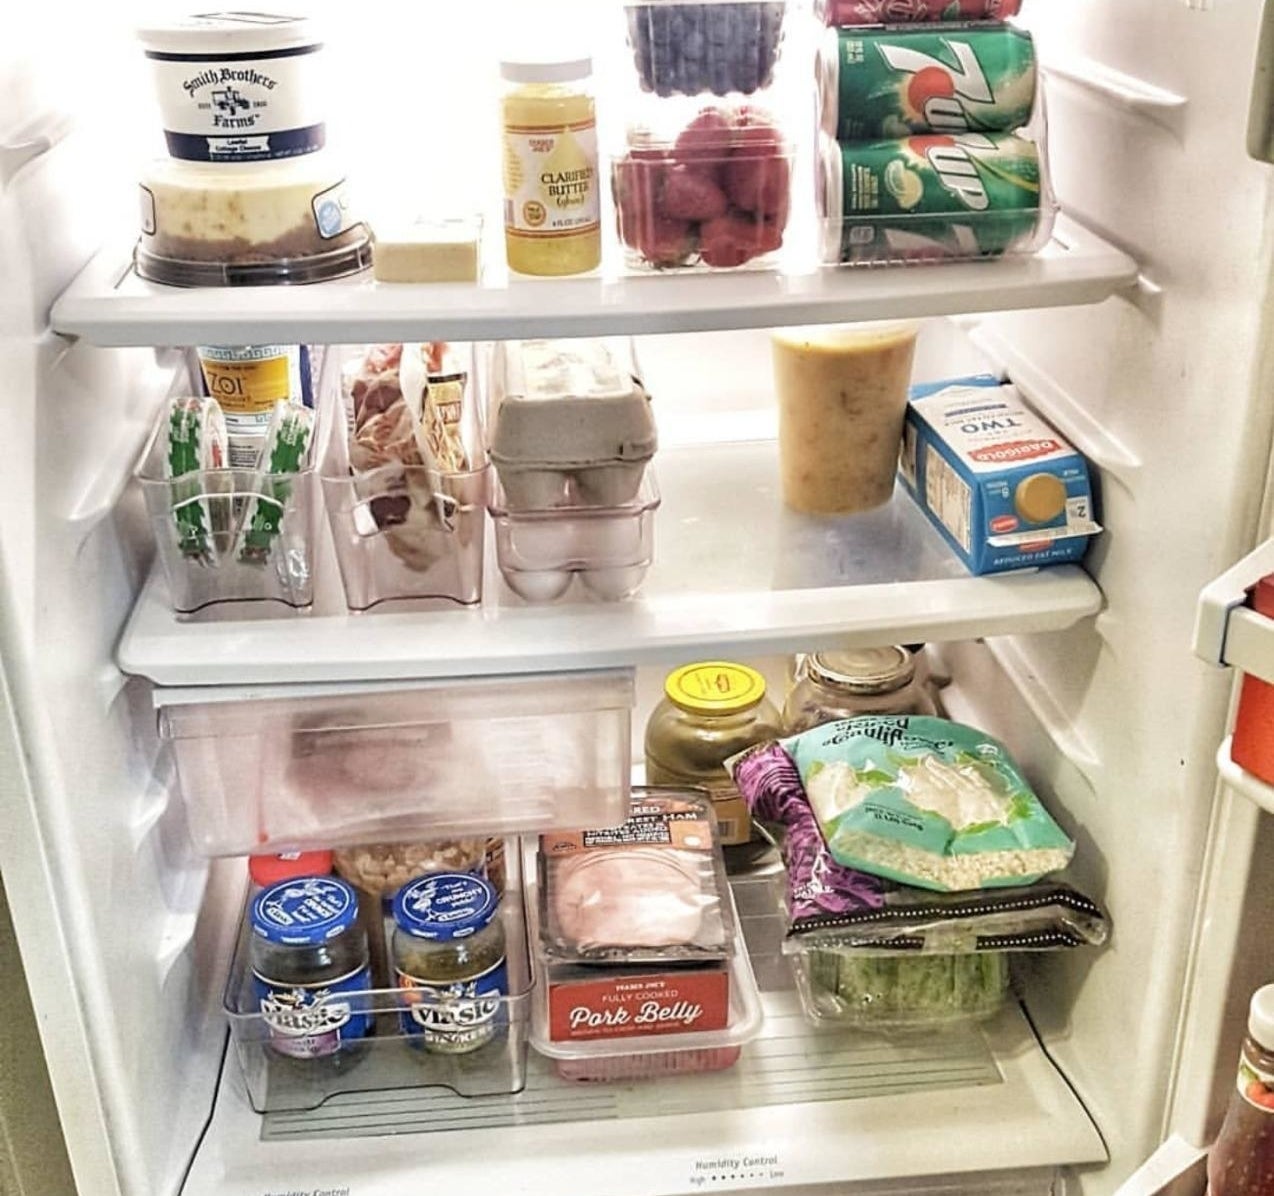 Reviewer photo showing the inside of a fridge organized using the bins